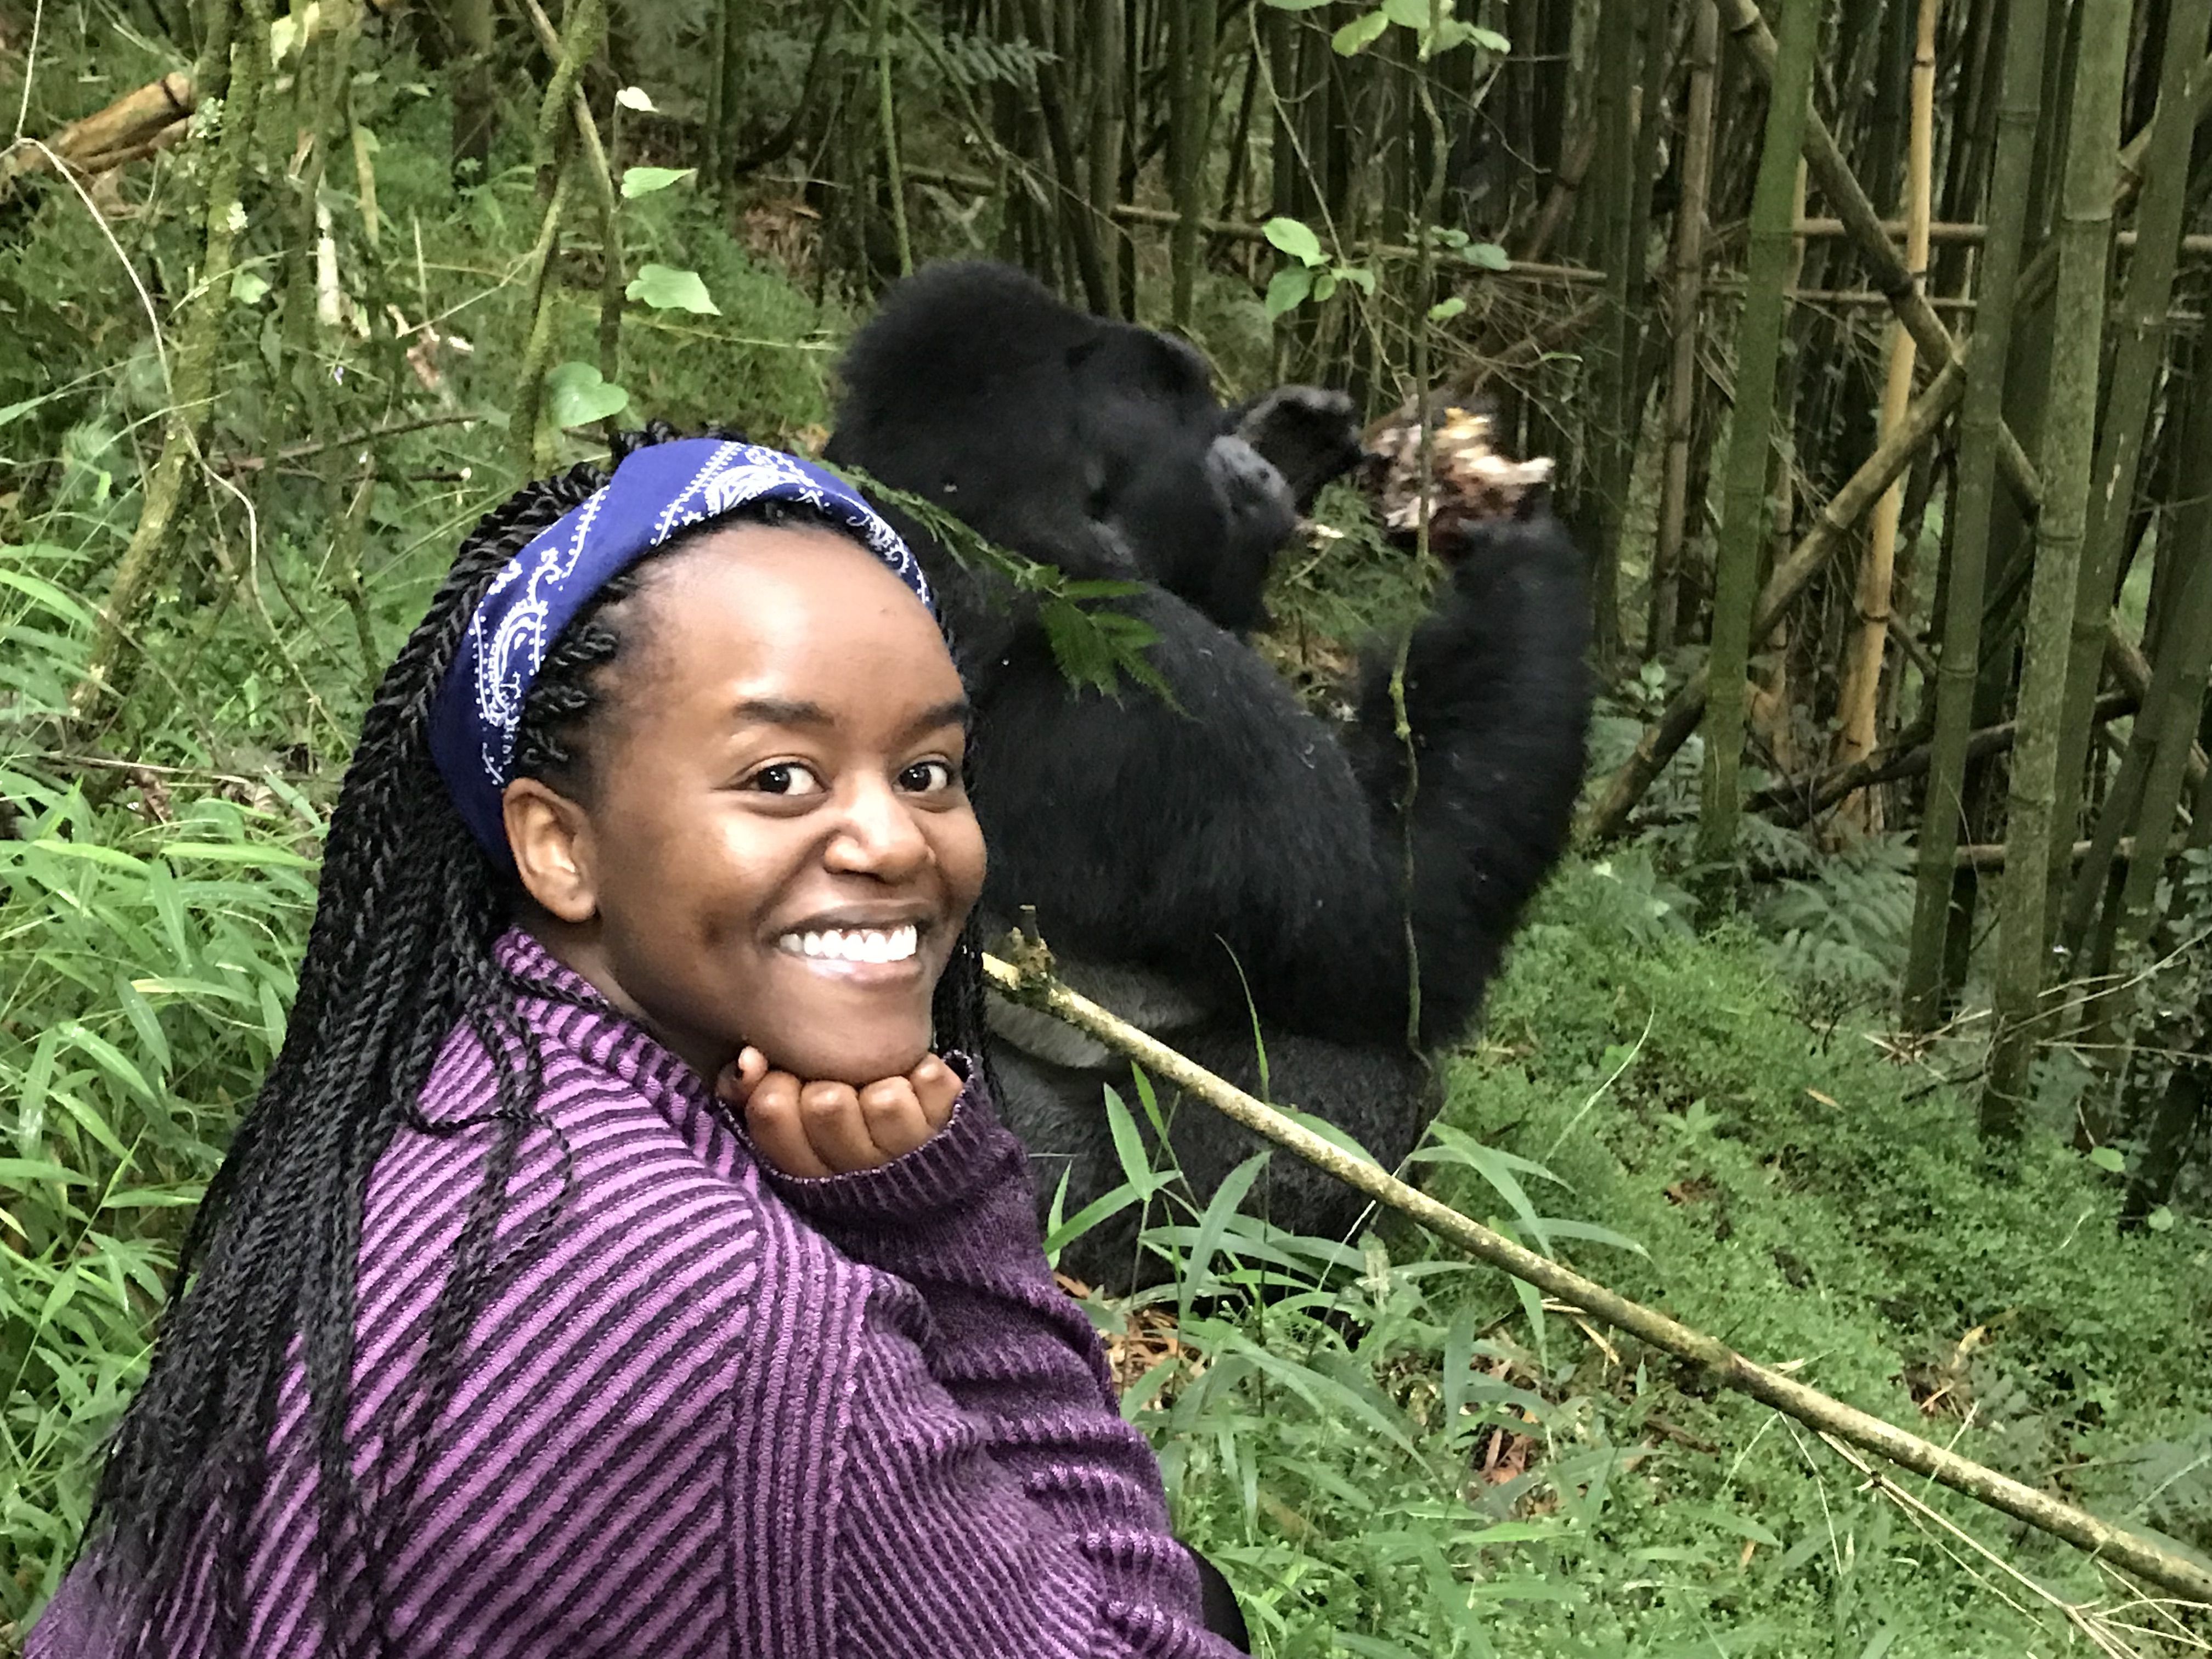 Mwende Mwololo with a silverback Gorilla in the background